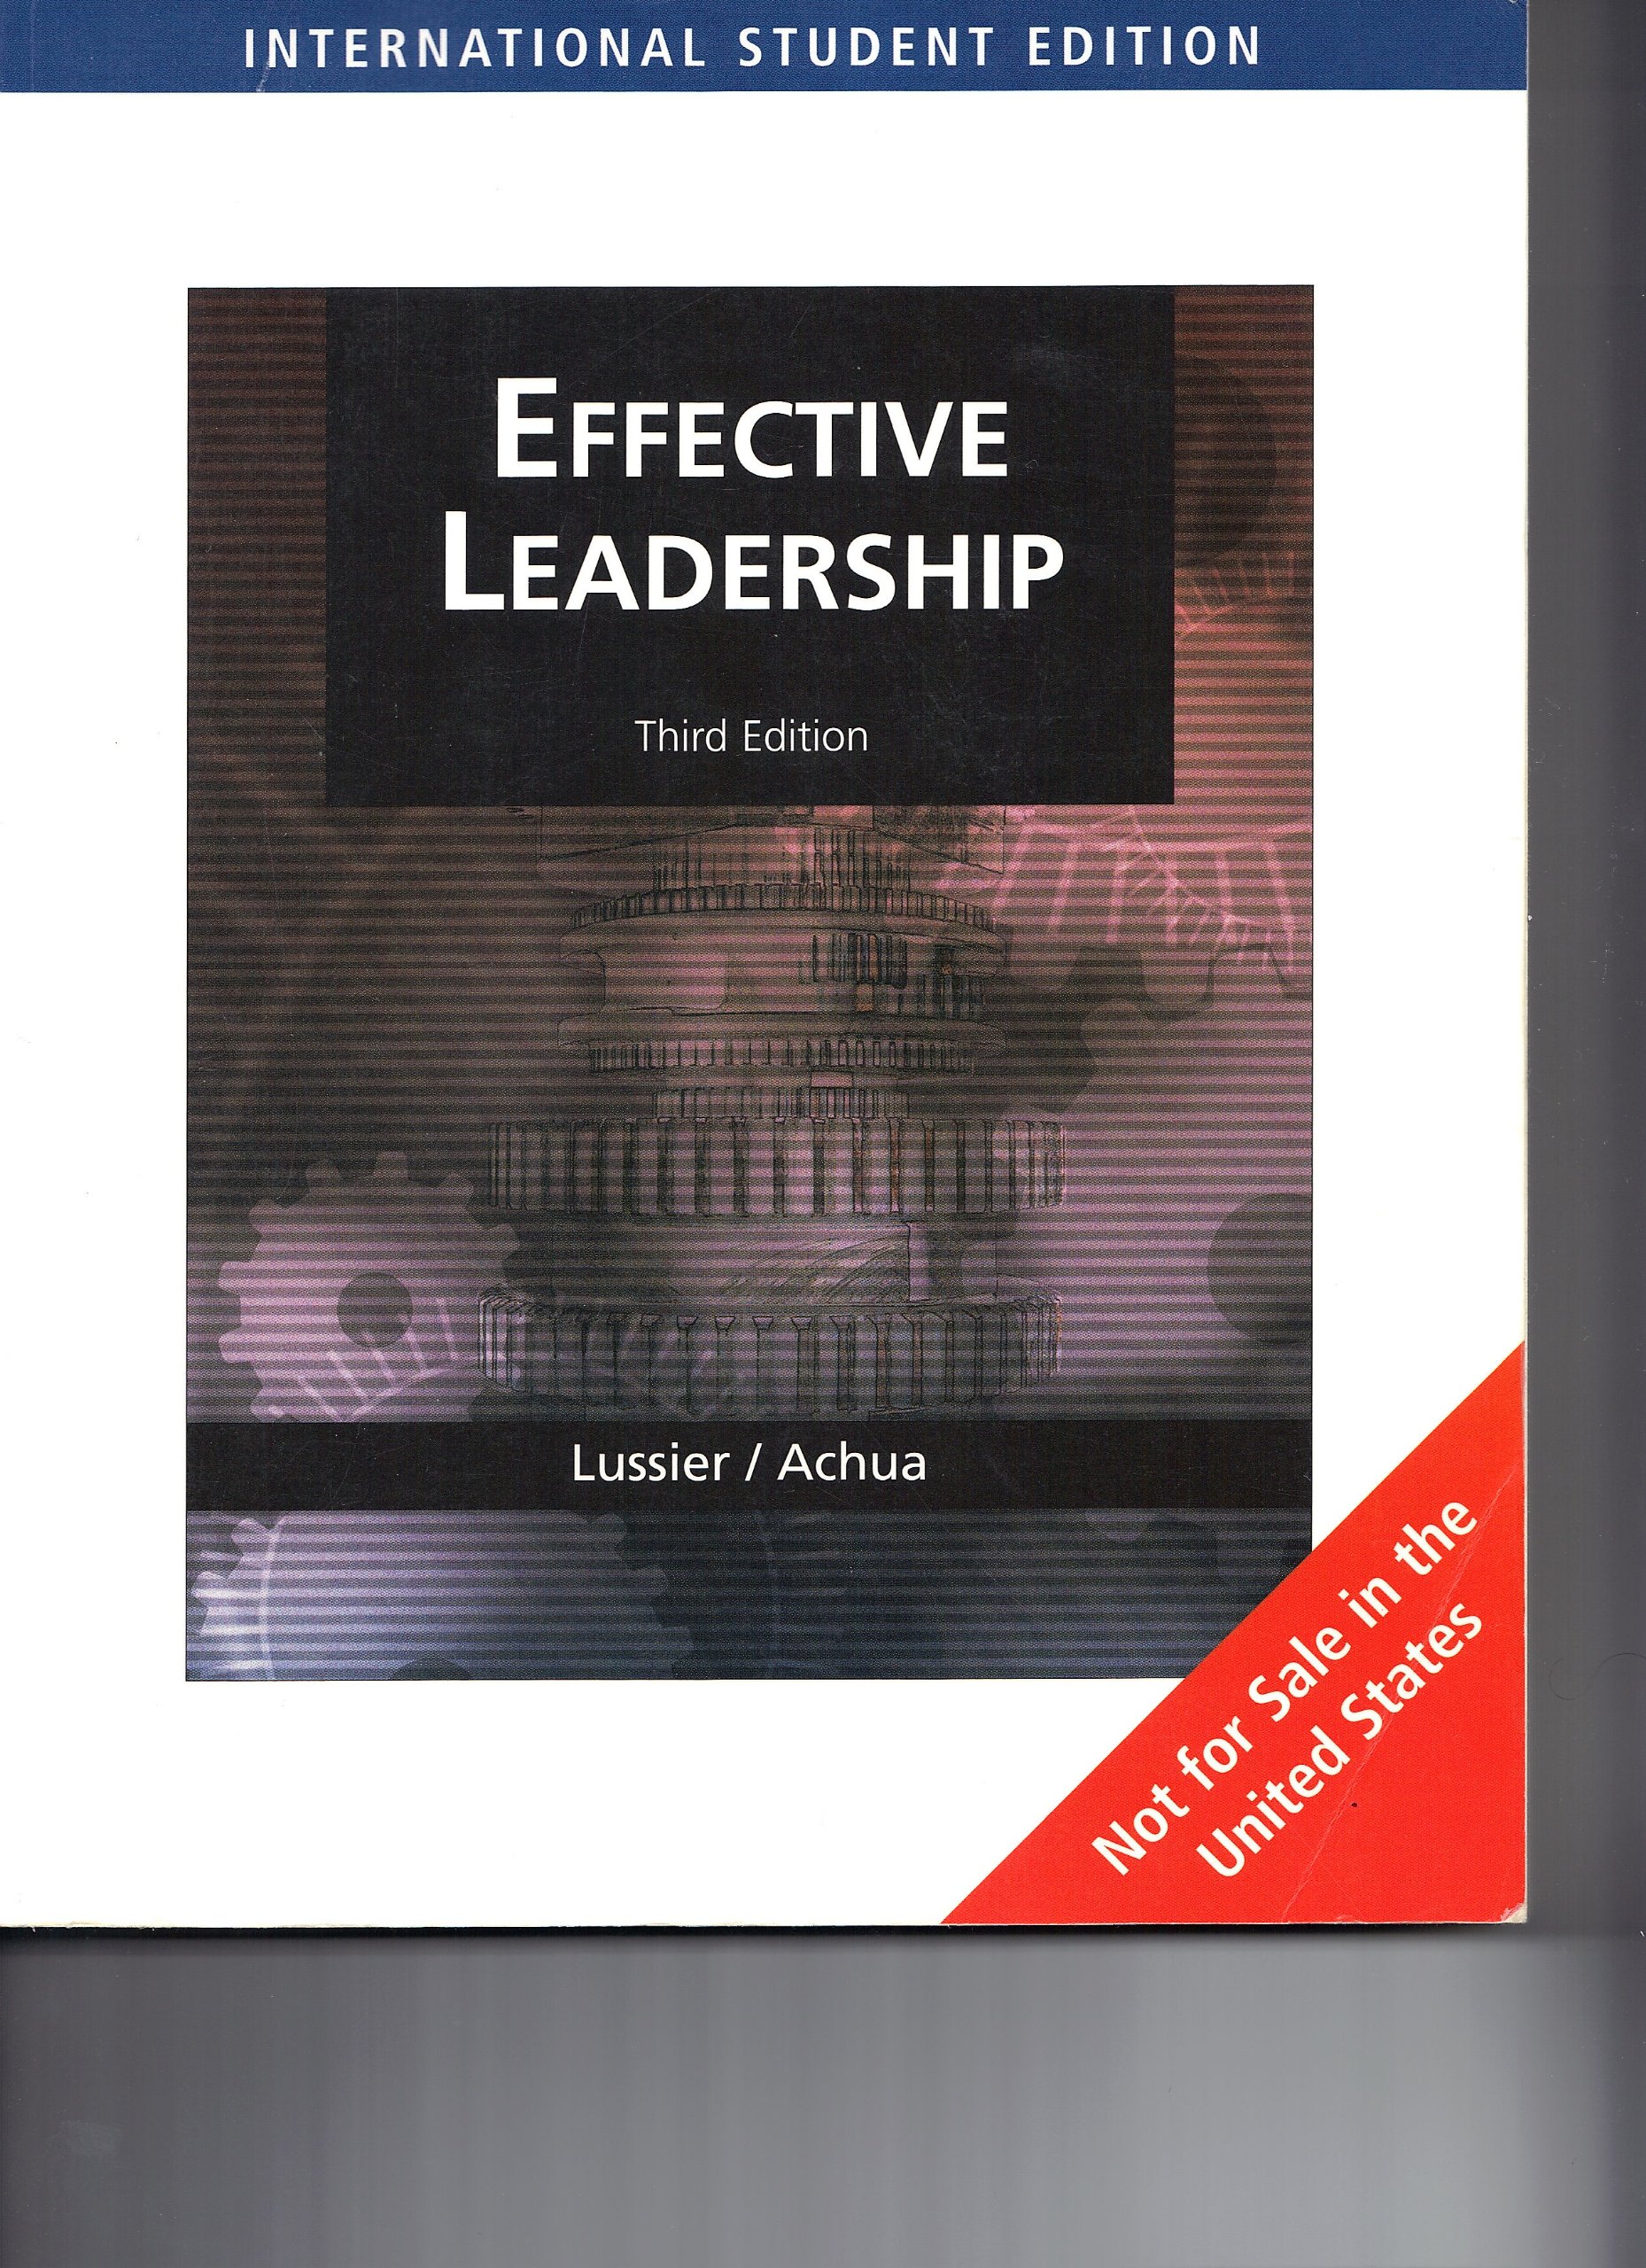 Effective Leadership By Lussier And Achua Pdf Printer